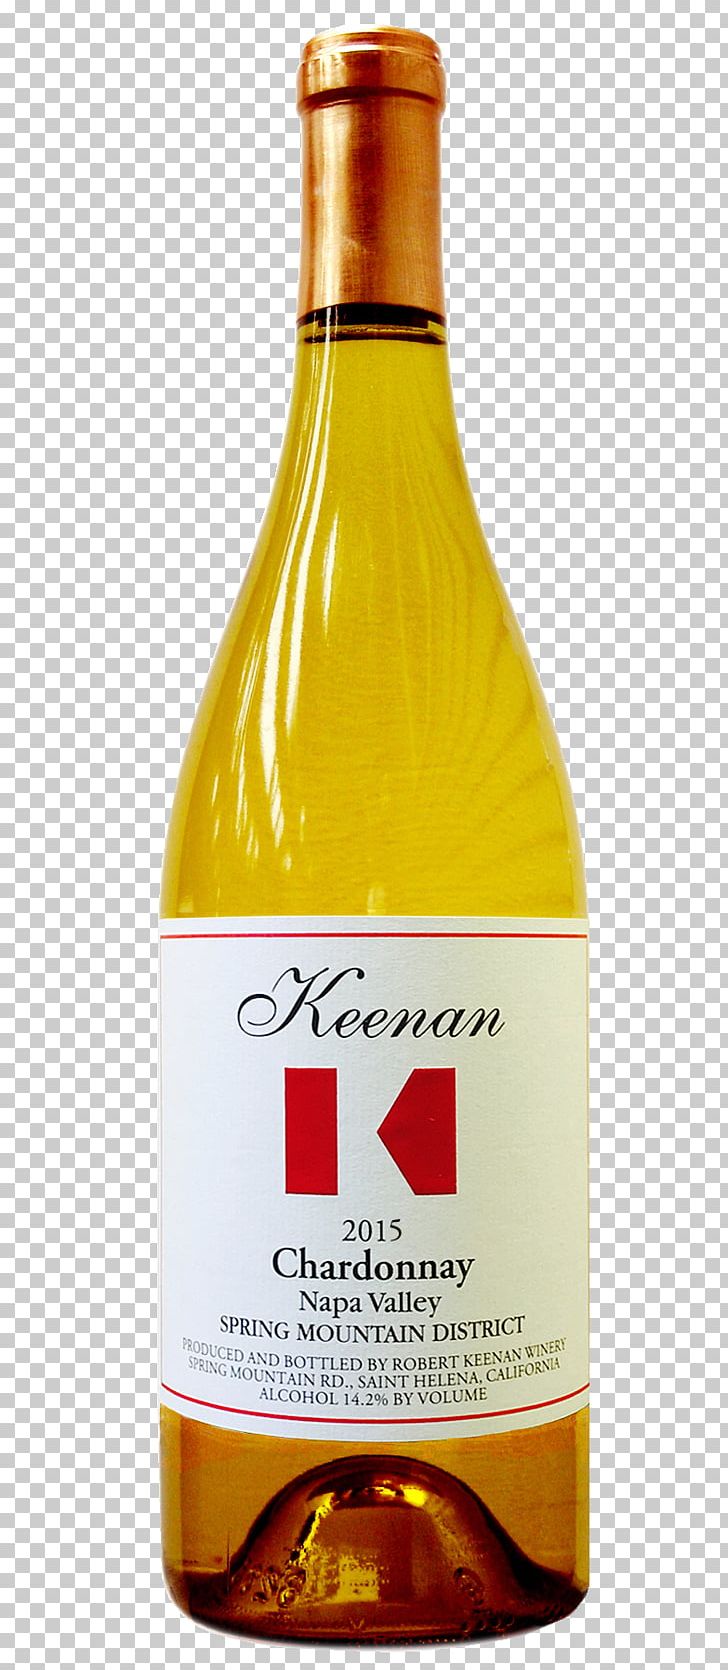 Keenan Winery Napa Valley Napa Valley AVA Cabernet Sauvignon Chardonnay PNG, Clipart, Bottle, Cabernet Franc, Cabernet Sauvignon, Chardonnay, Common Grape Vine Free PNG Download